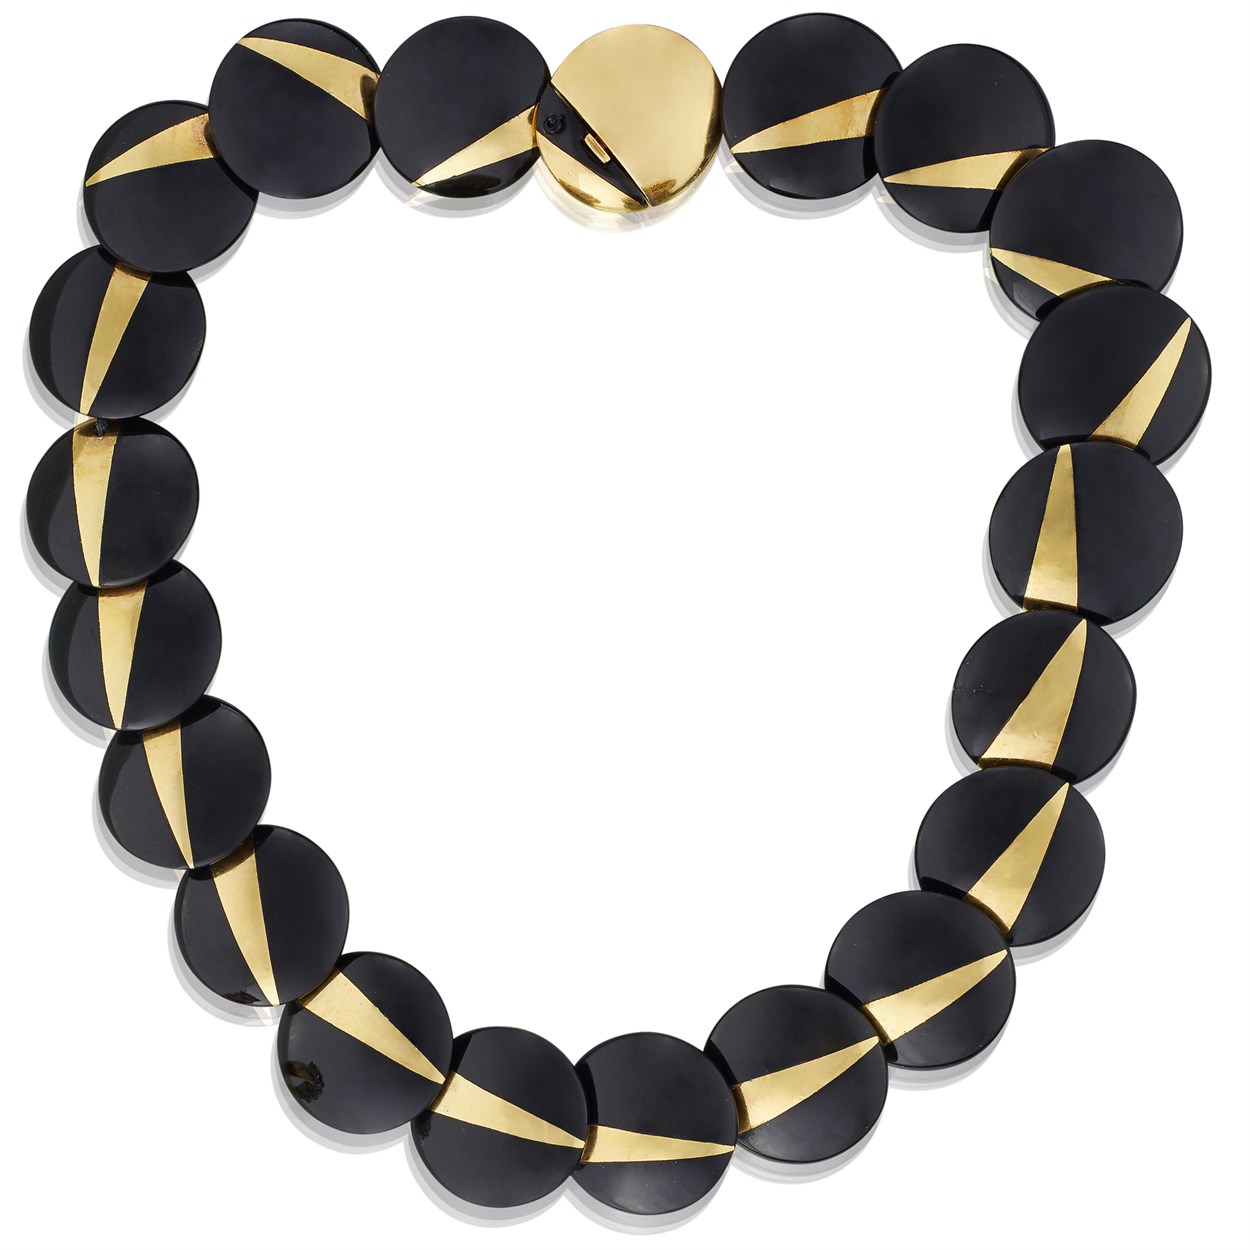 Lot 49 - An onyx and eighteen karat gold necklace, Angela Cummings for Tiffany & Co.